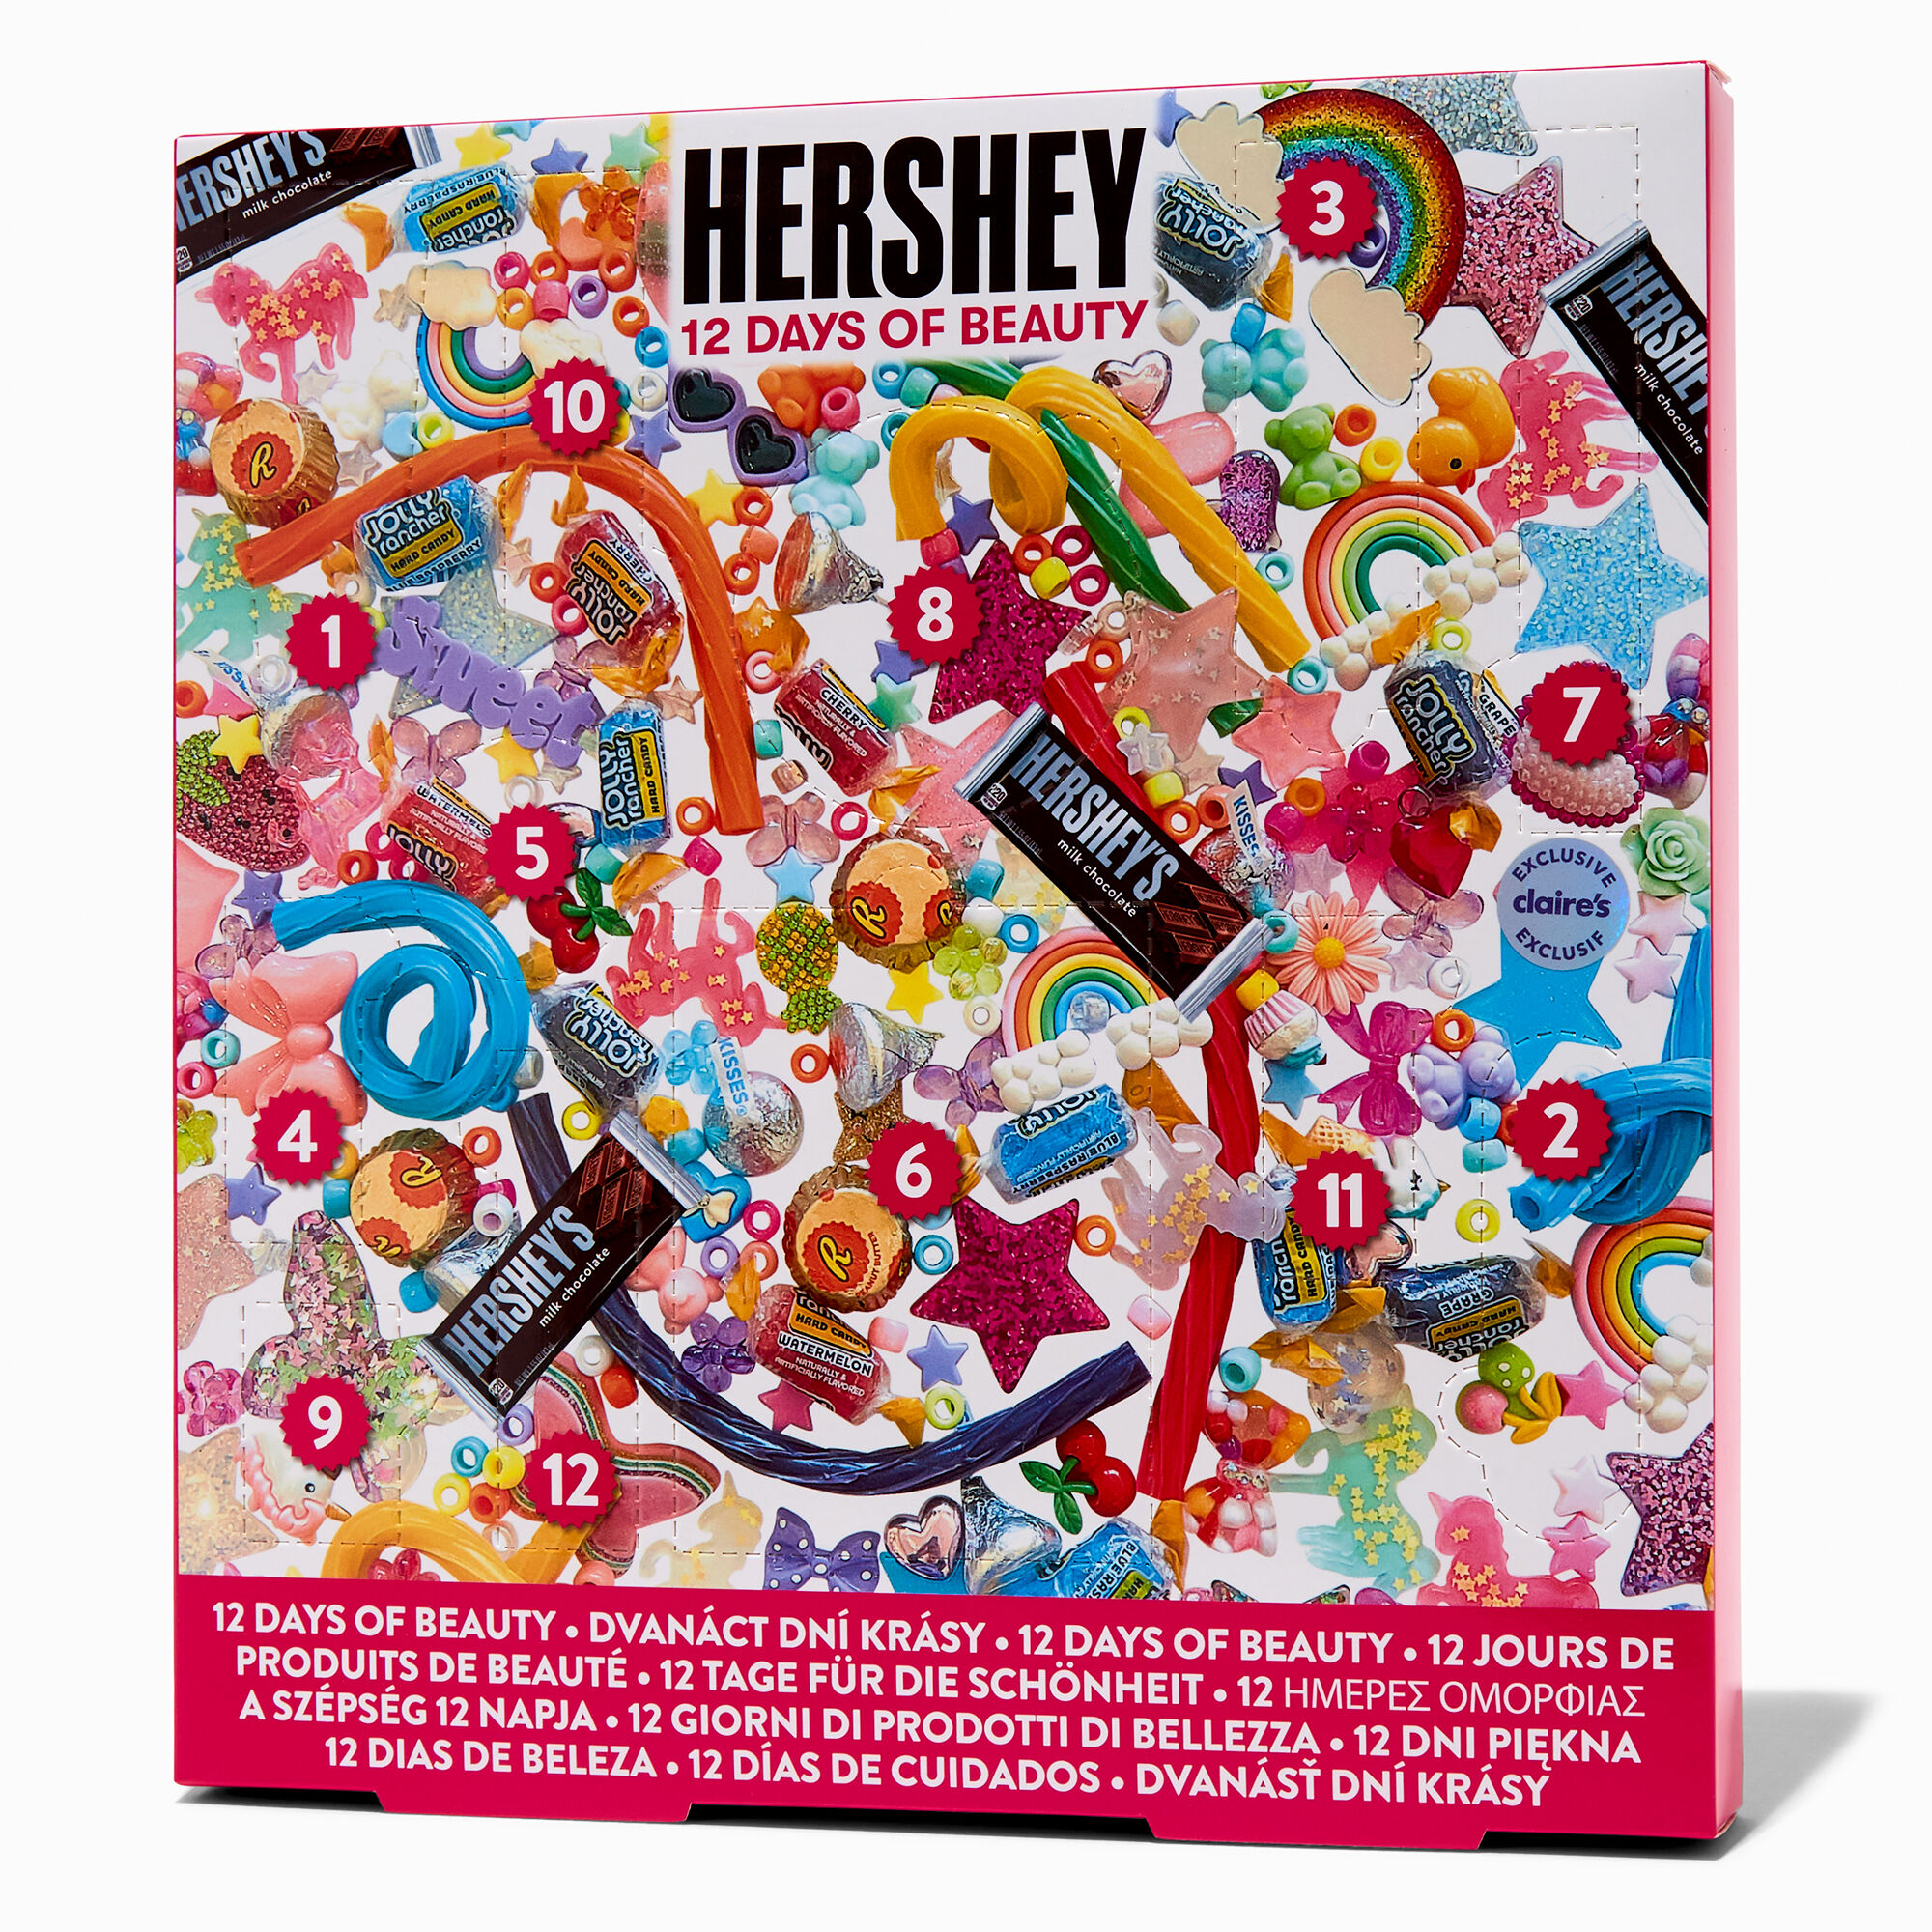 View Claires Hersheys 12 Days Of Beauty Advent Calendar information